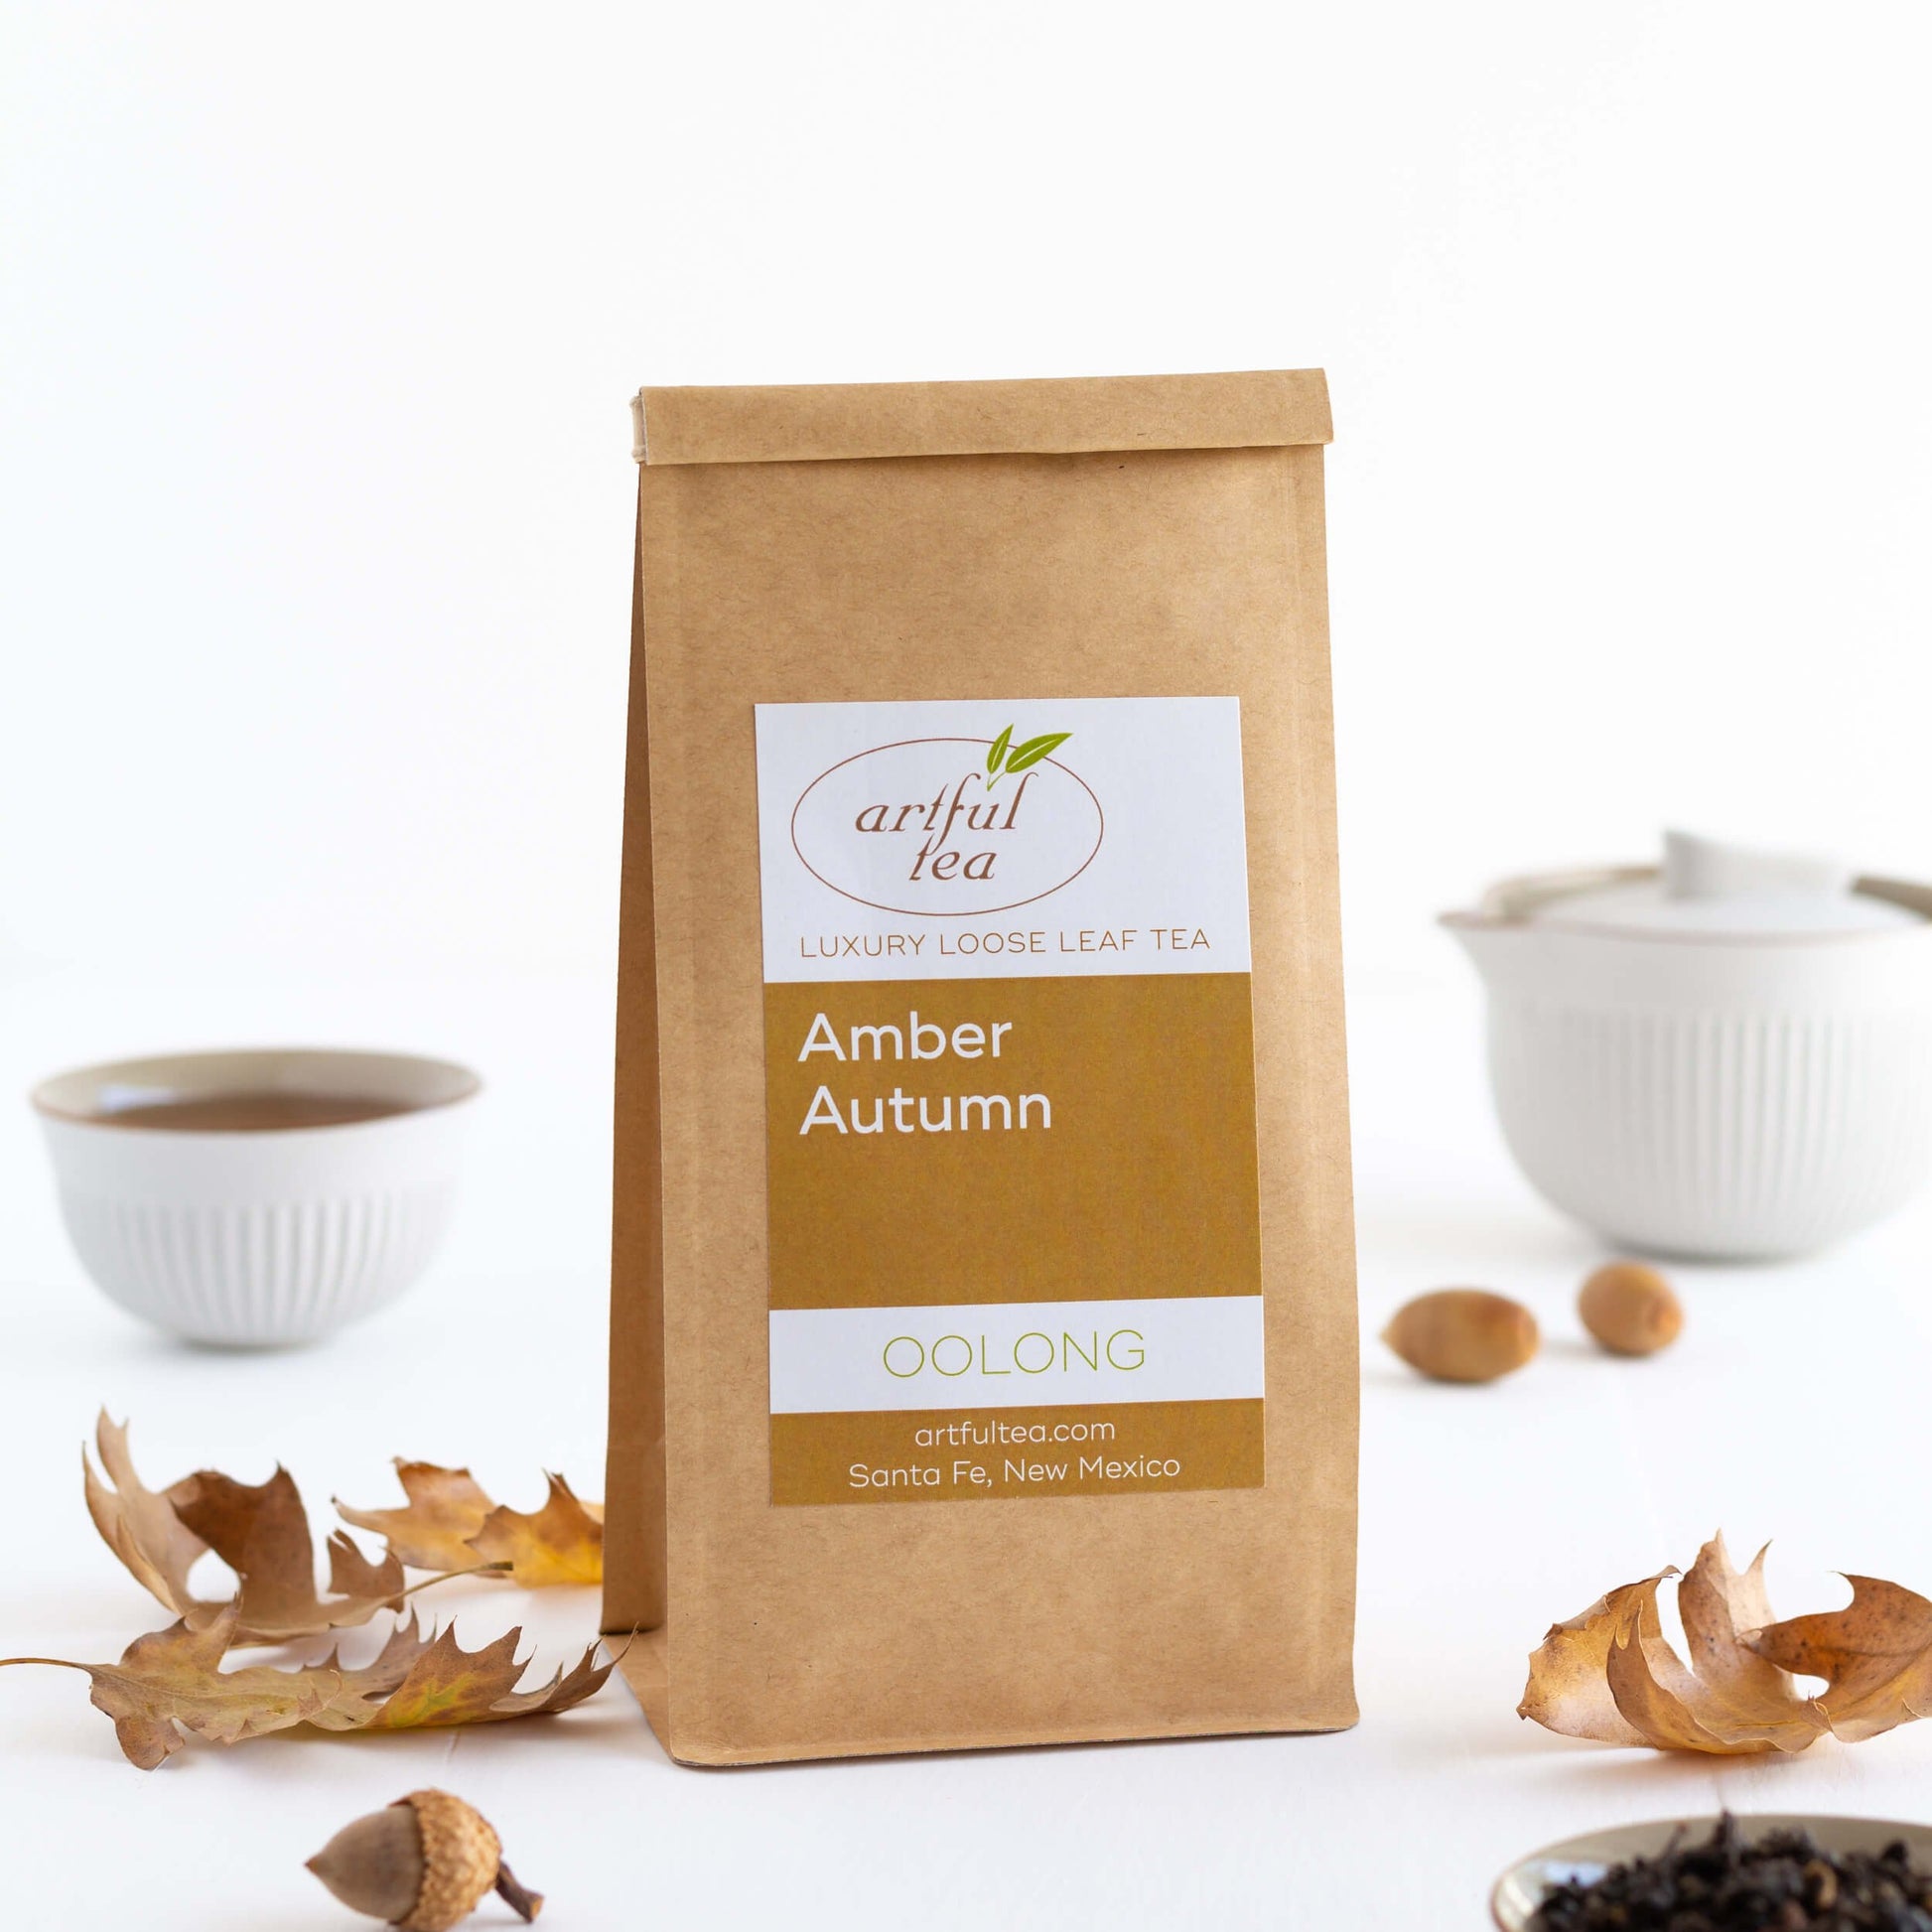 Amber Autumn Oolong shown packaged in a kraft bag, with acorns and brown tree leaves nearby, and a tiny white teacup and teapot in the background.